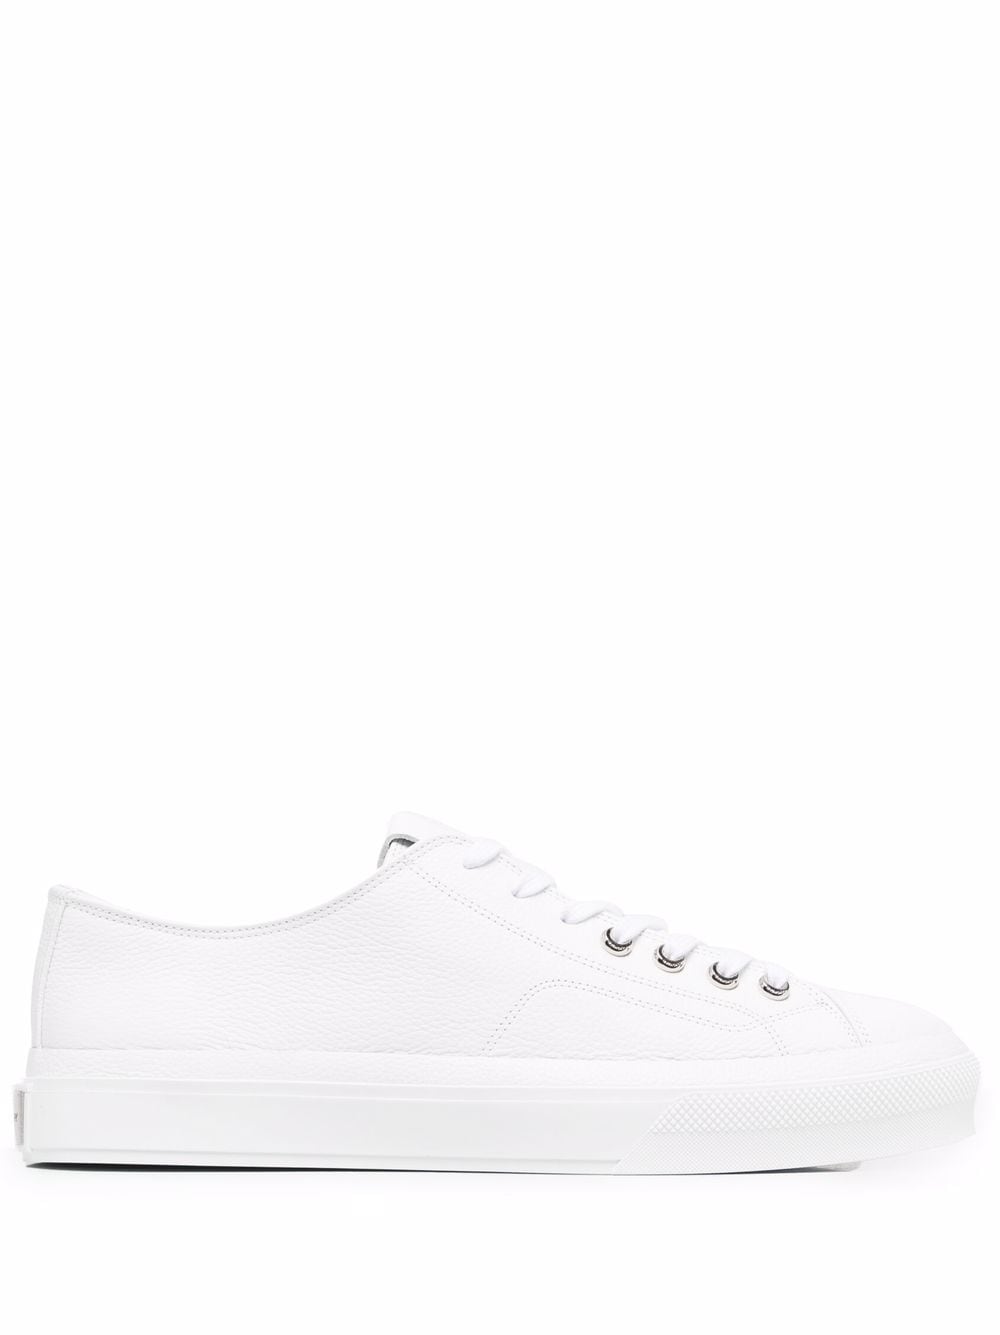 City Low Leather Sneakers мъжки обувки Givenchy 843276415_39